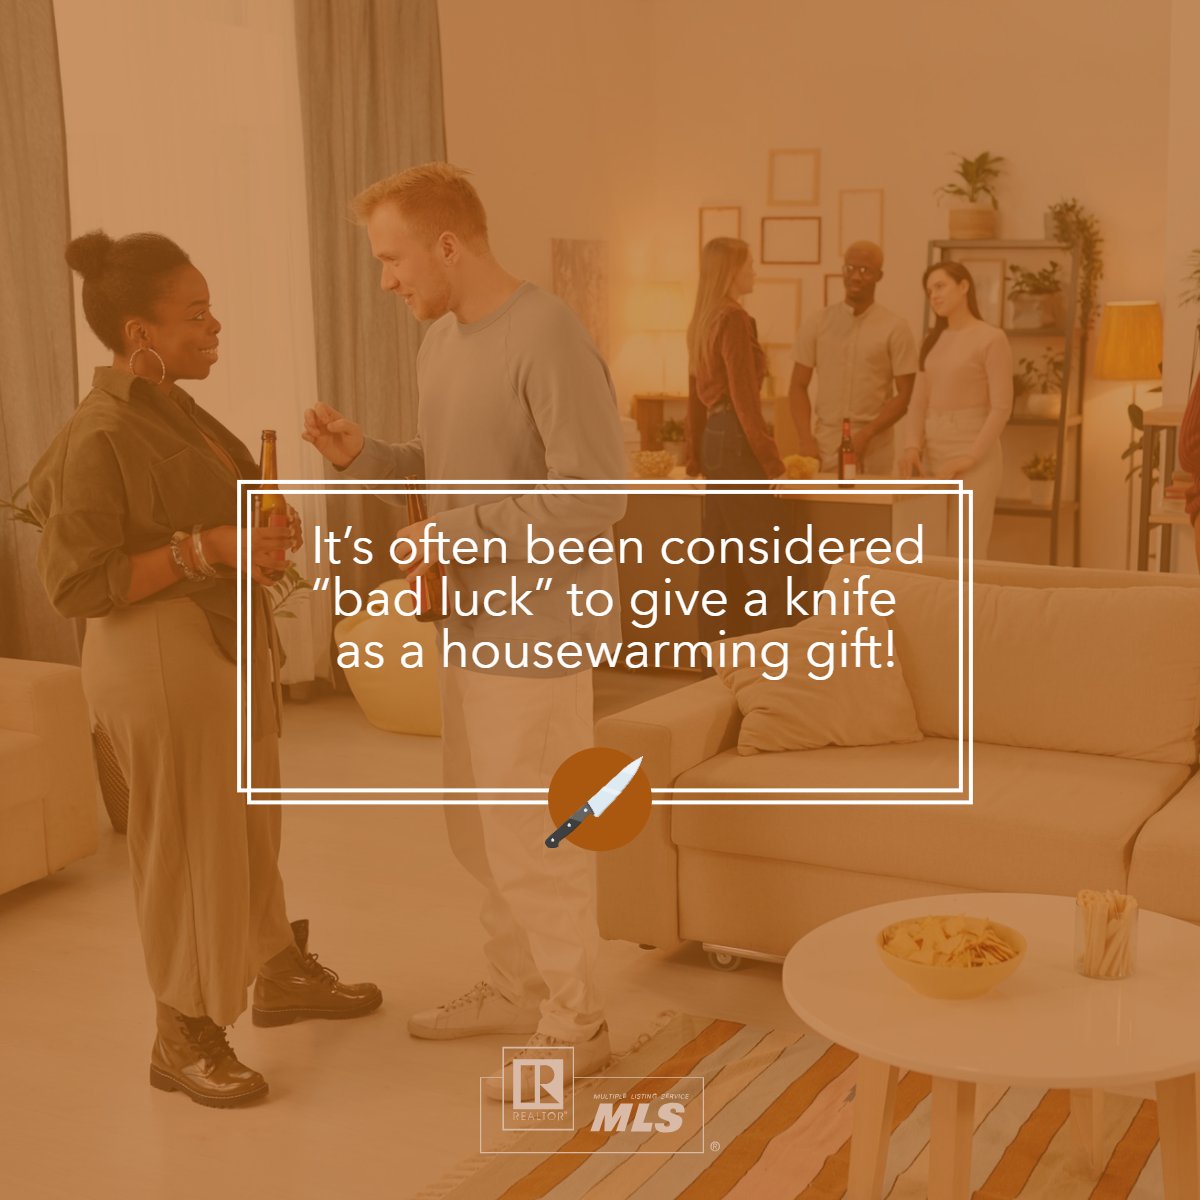 What do you consider a good house warming gift? 

Share it below!

#HouseWarming #HouseWarmingGift 
 #AmericasMortgageSolutions #christianpenner #onestopbrokershop #mortgagebrokerwestpalmbeach #epicrealeststedeals #TheChristianPennerMortgageTeam #mortgagebrokerflorida